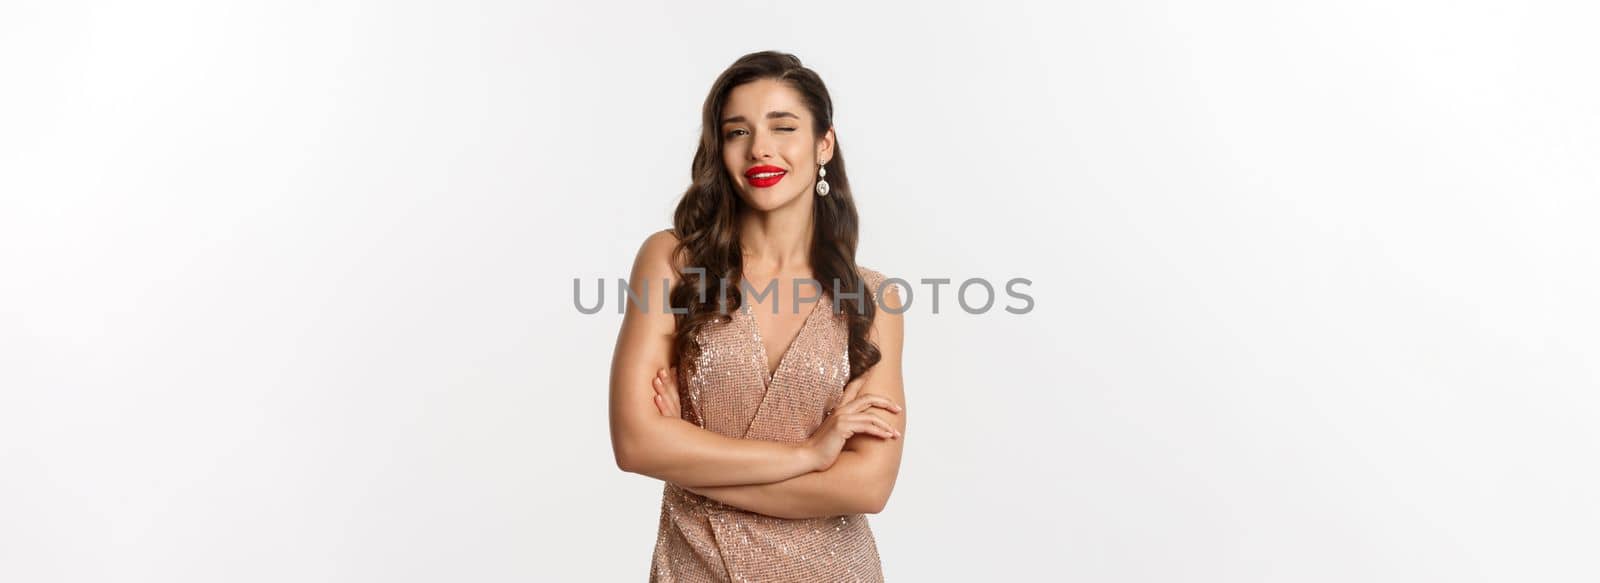 Beautiful woman in evening dress and red lipstick, winking at camera and smiling, celebrating New Year party, standing over white background.